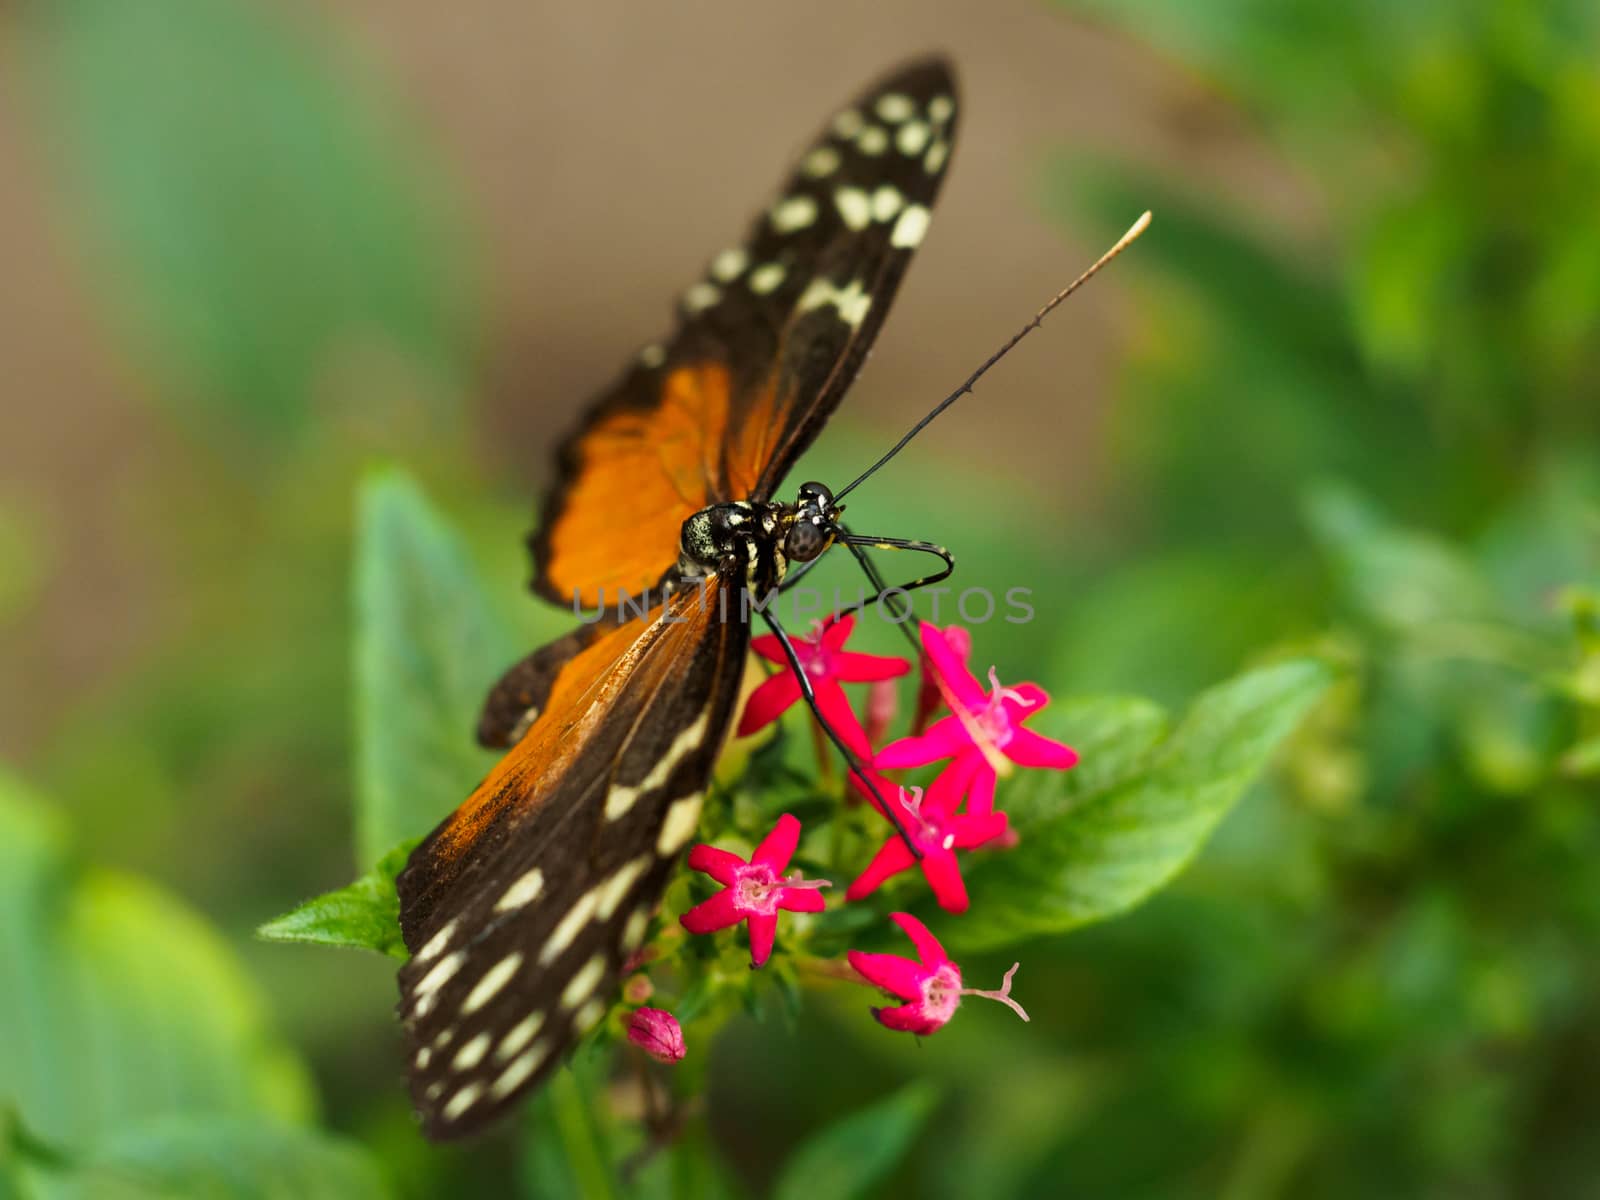 Spotted butterfly on pink flower by frankhoekzema